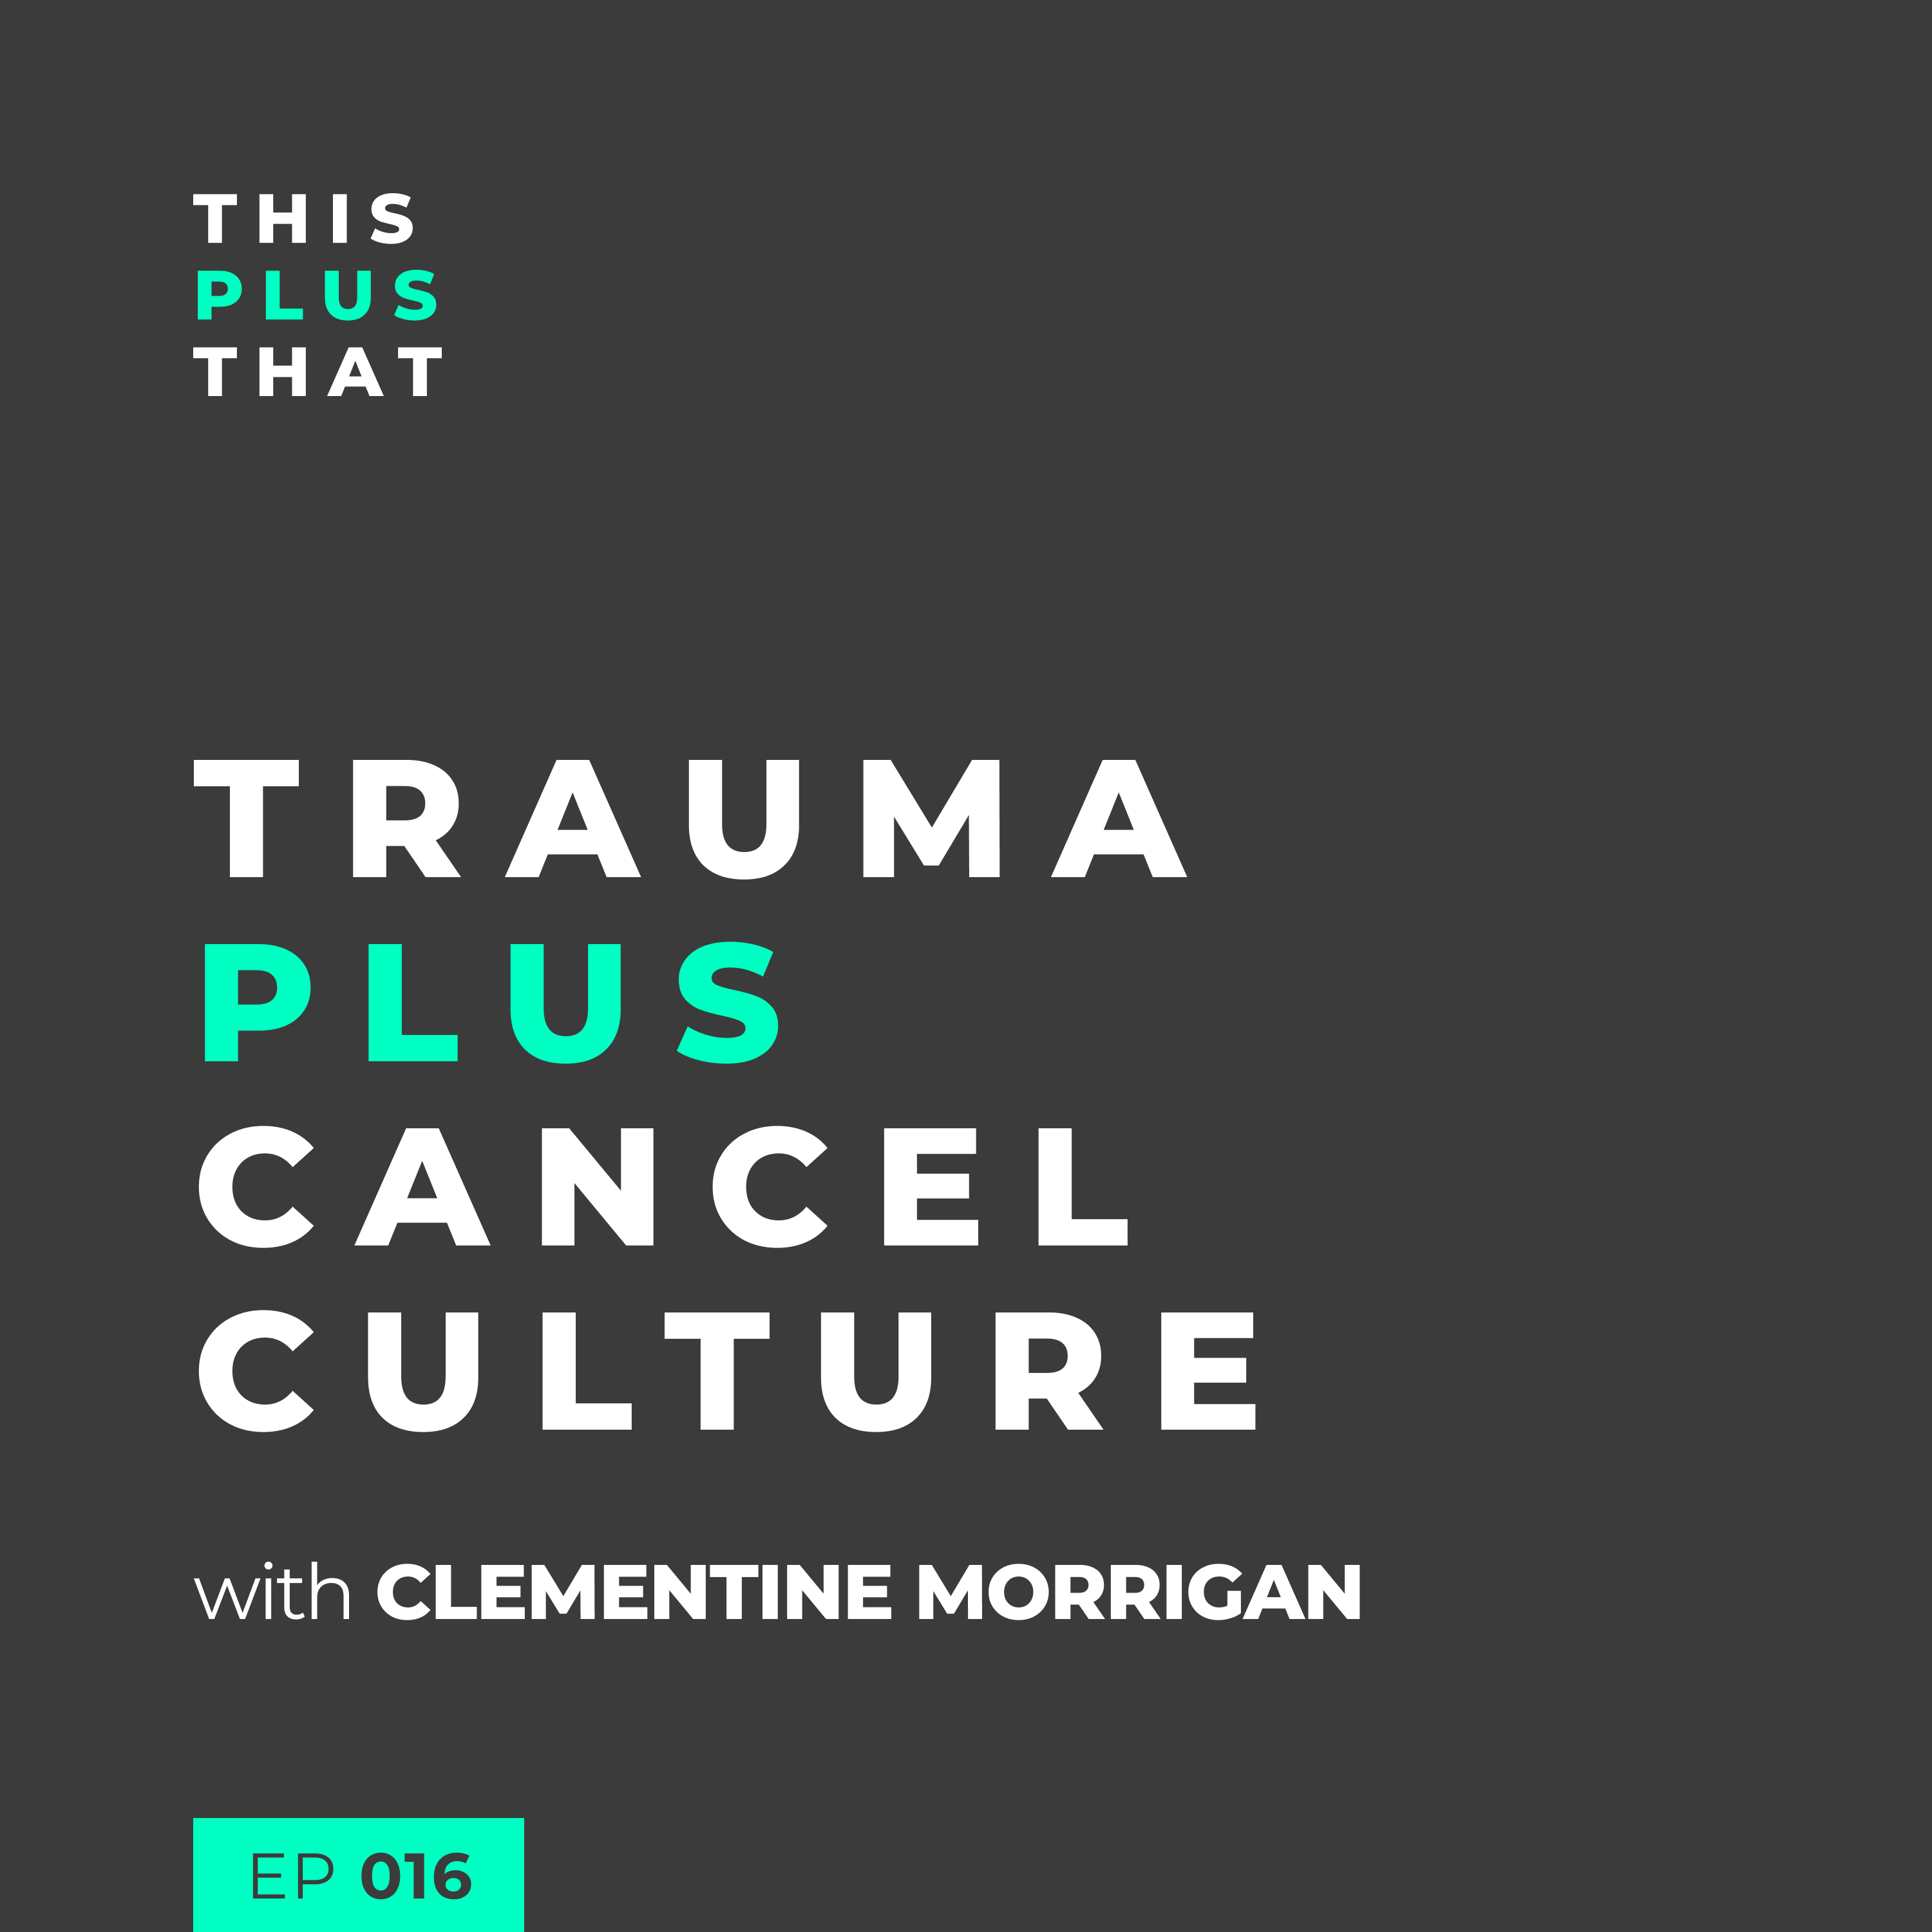 Trauma + Cancel Culture with Clementine Morrigan